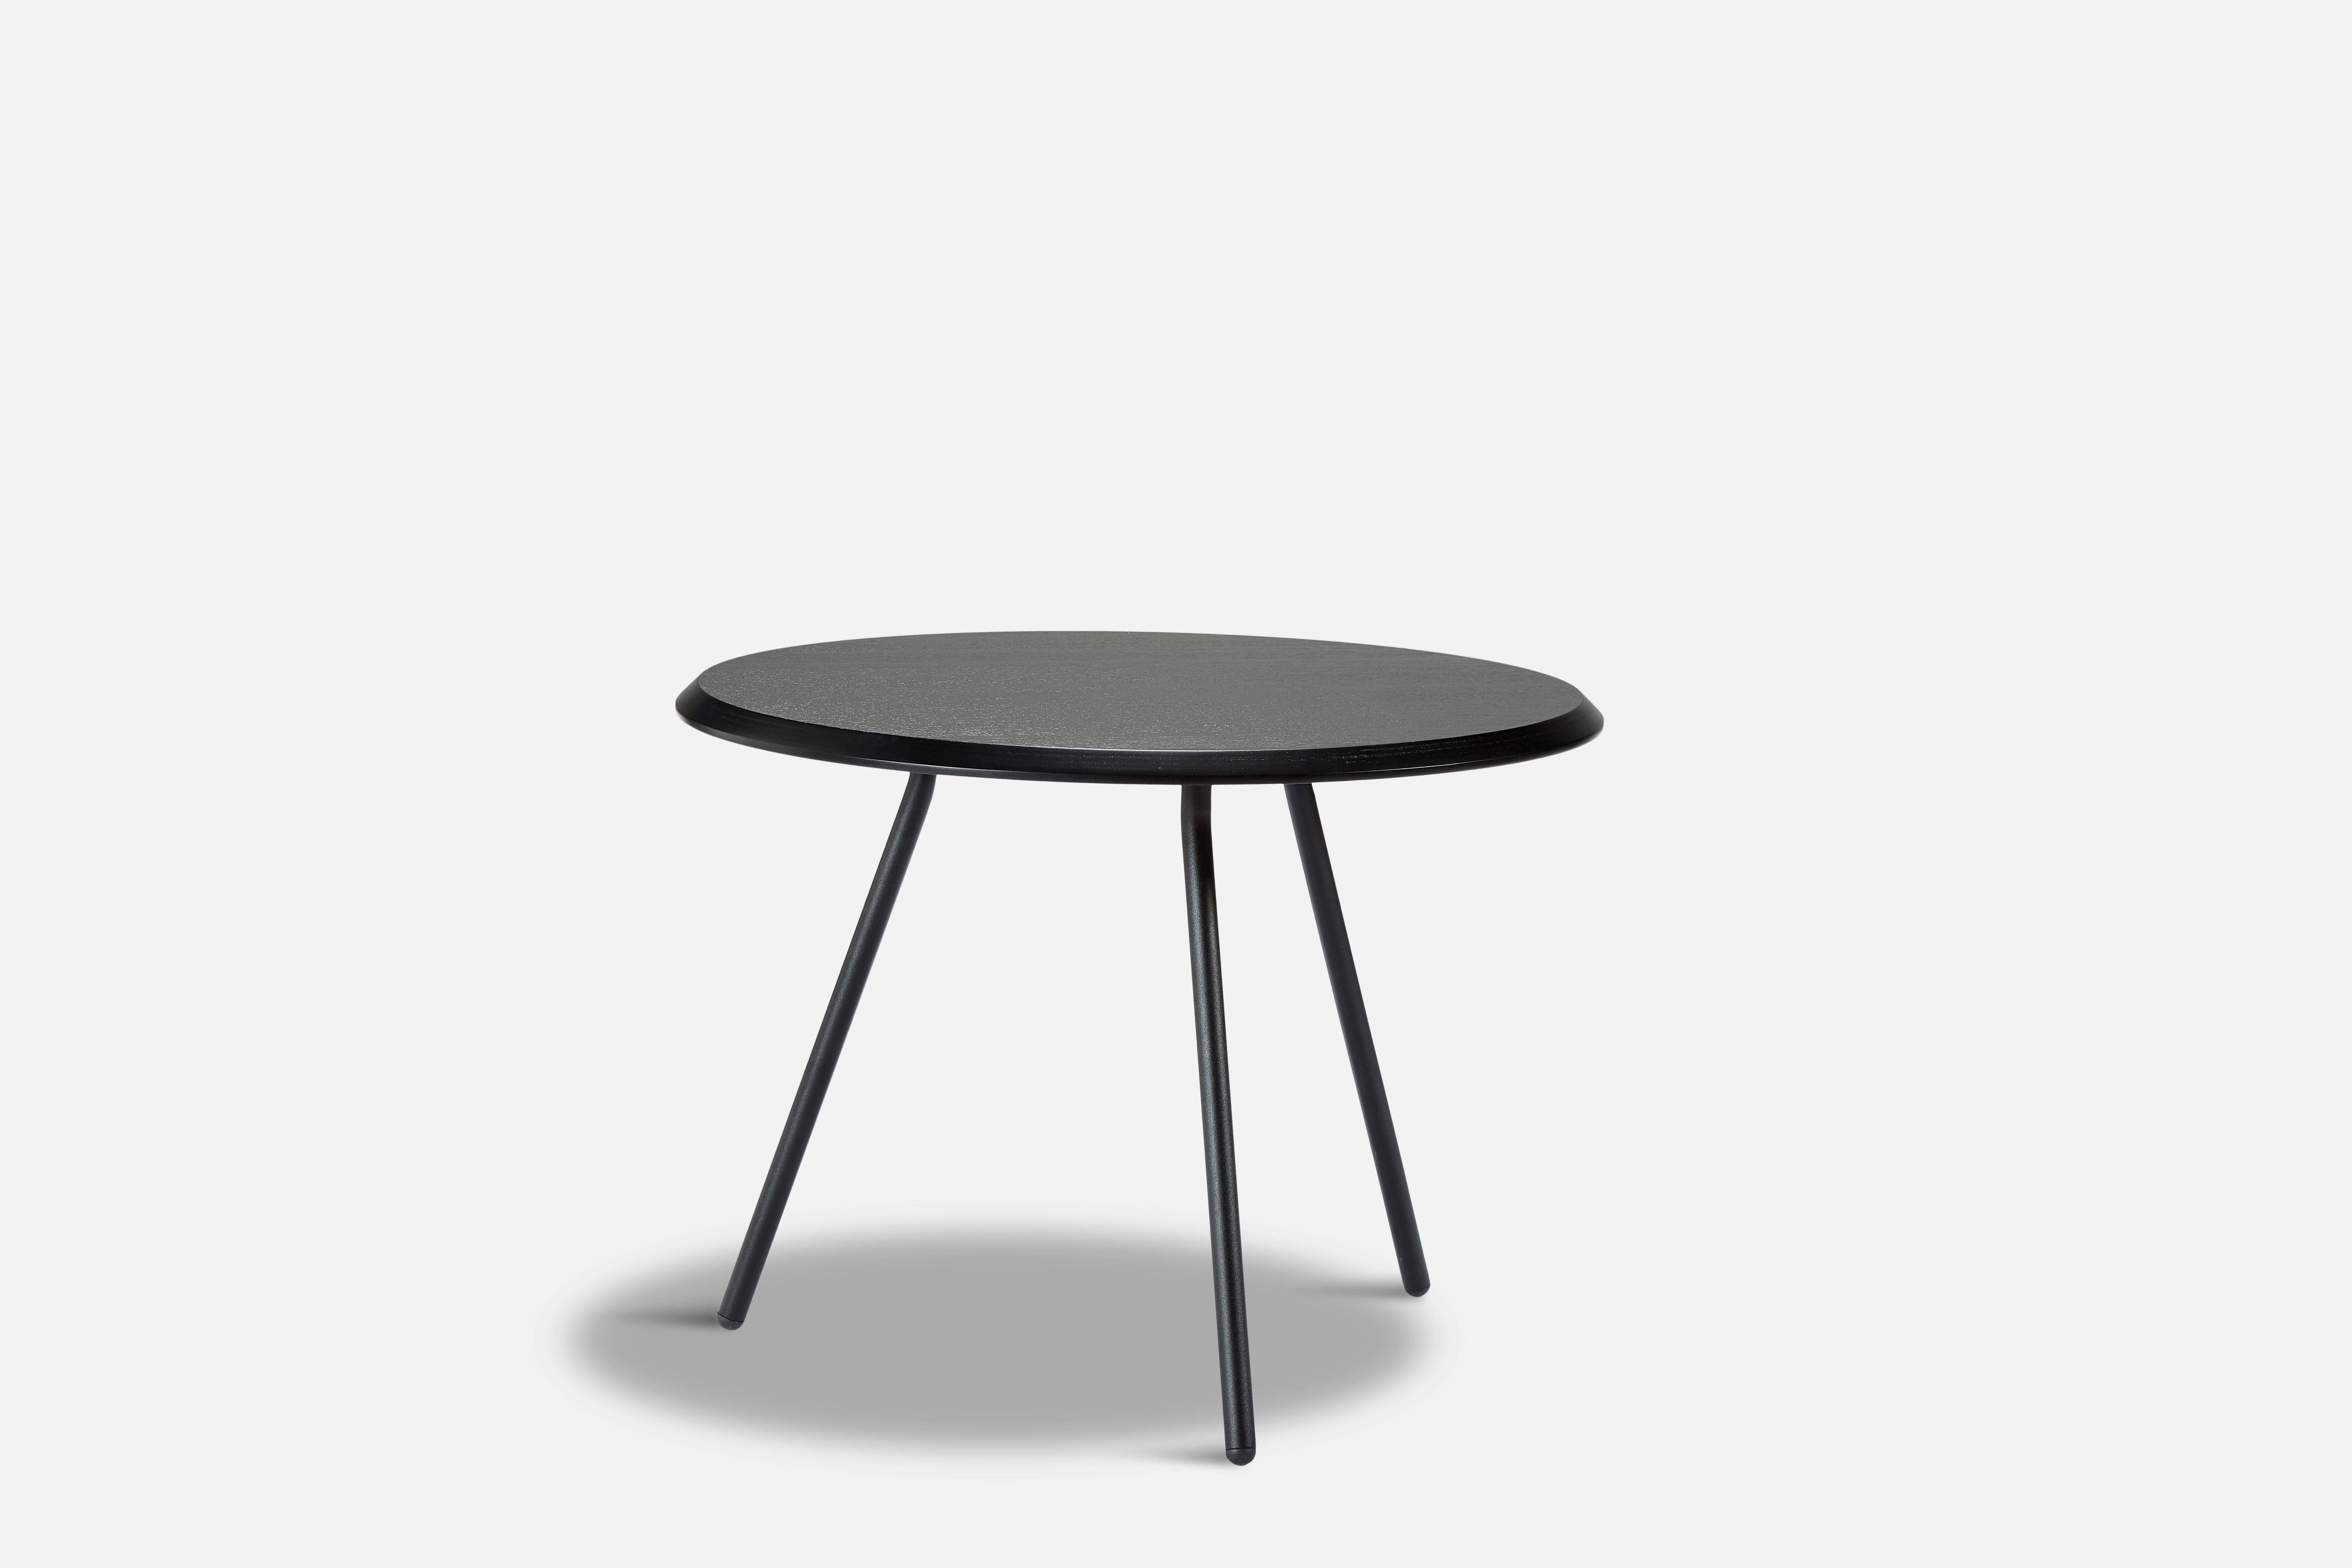 Black ash soround coffee table 60 by Nur Design
Materials: Metal, ash
Dimensions: D 60 x W 60 x H 49 cm
Also available in different sizes.

The founders, Mia and Torben Koed, decided to put their 30 years of experience into a new project. It